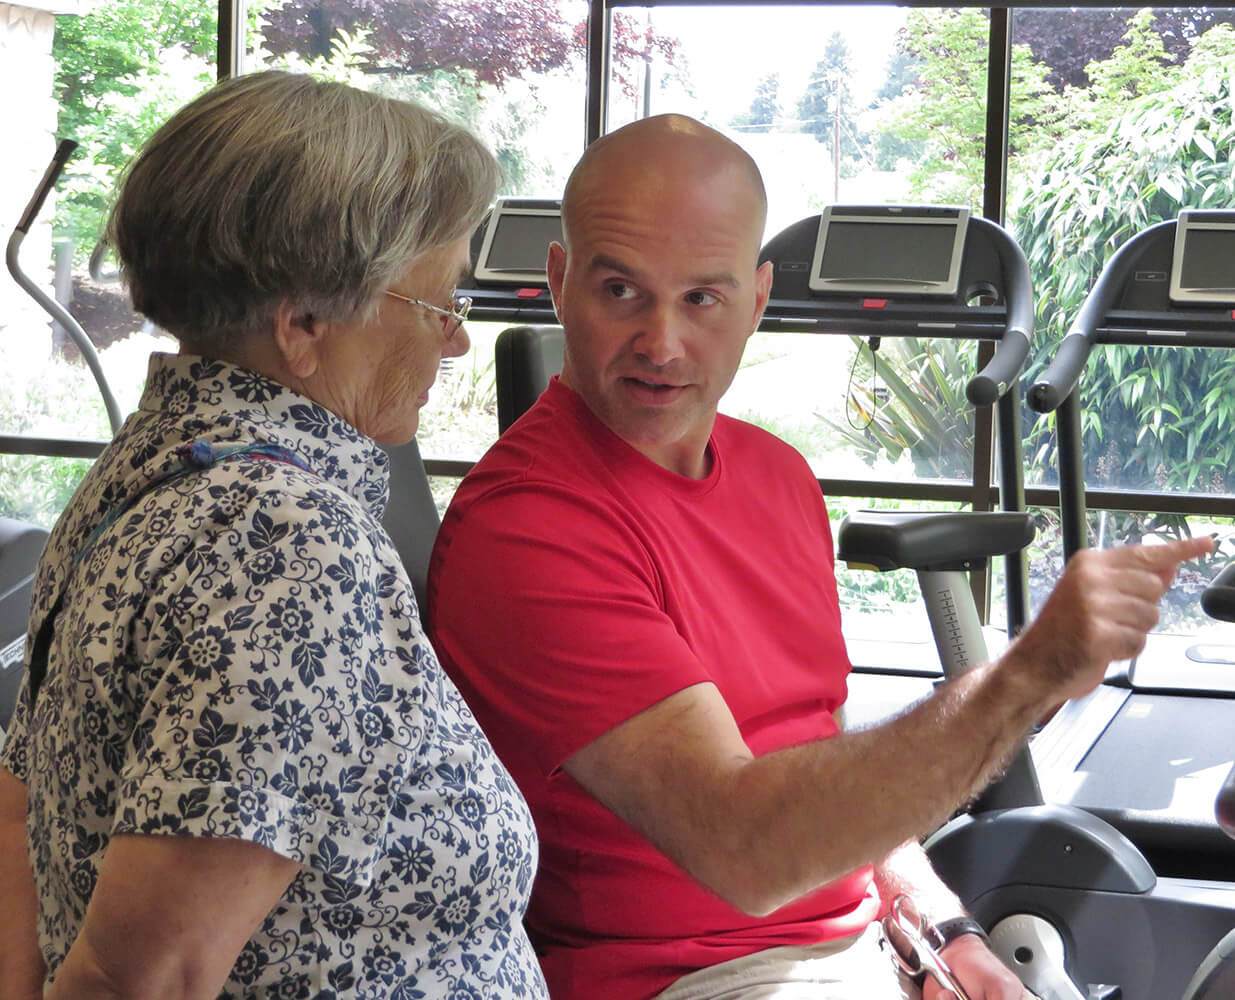 The Willamette View trainer showing a woman how to use the fitness equipment